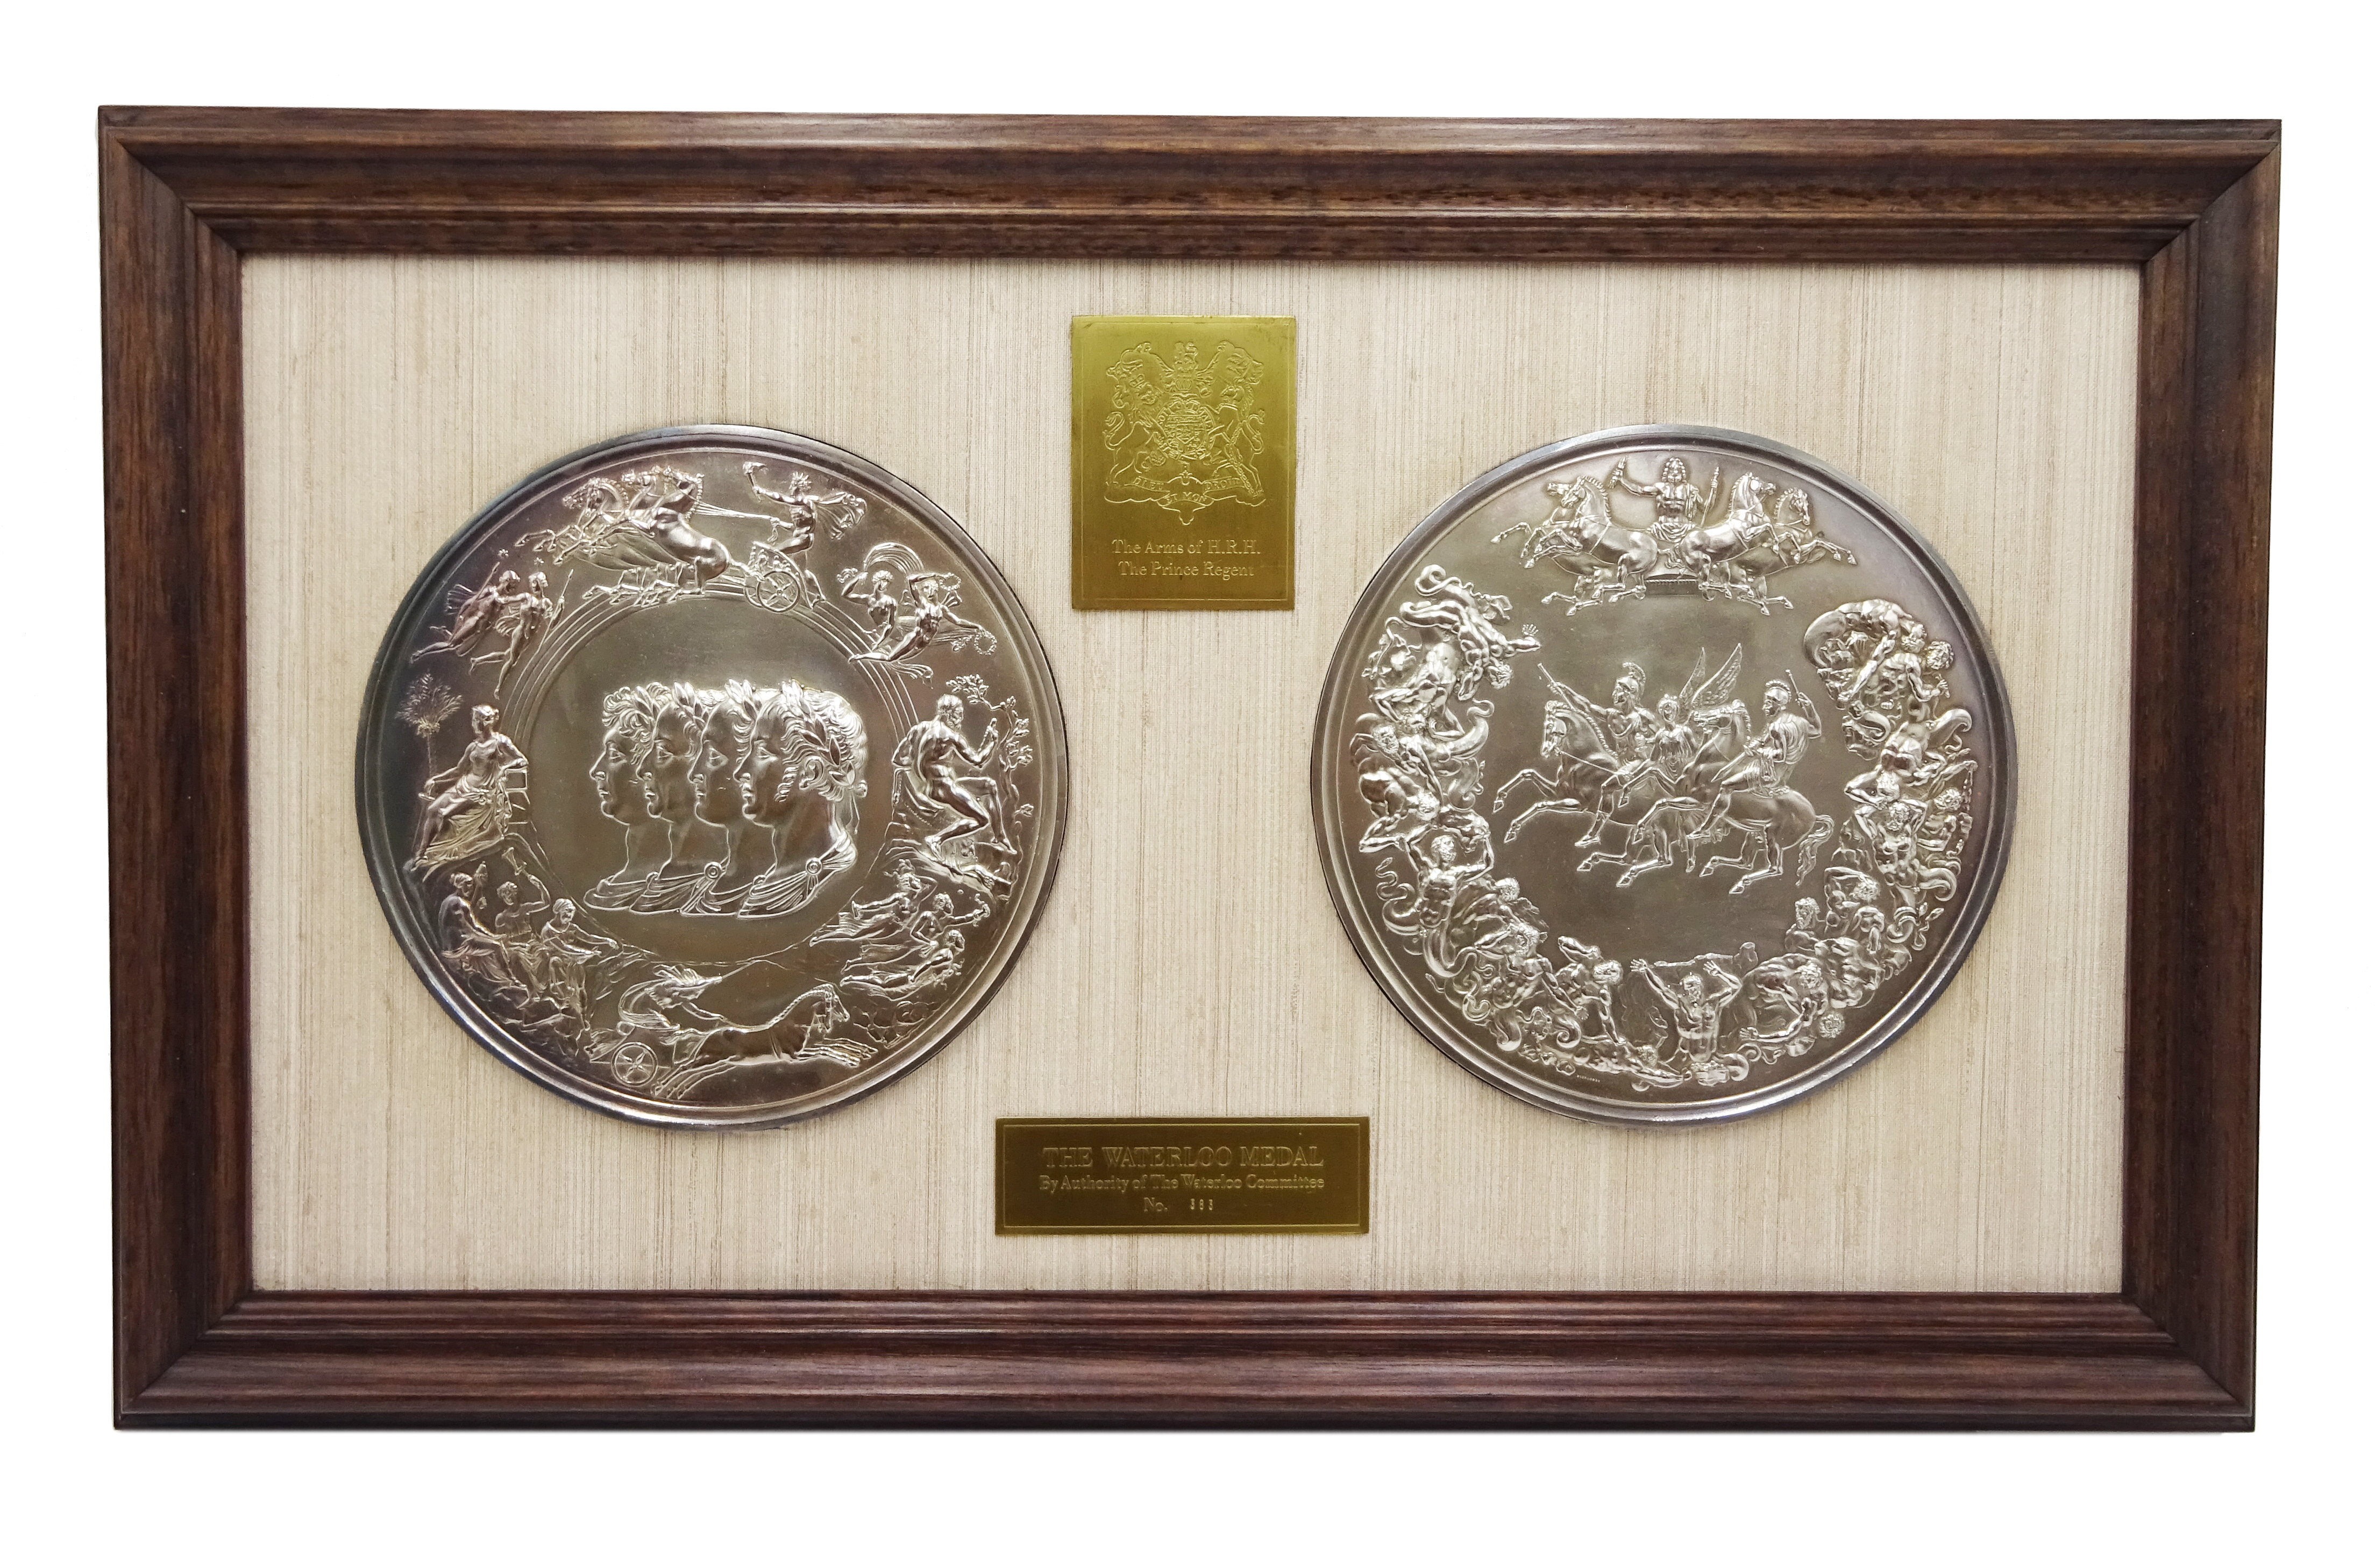 'The Waterloo Medal' fine silver medals commemorating the 160th anniversary of the Battle of